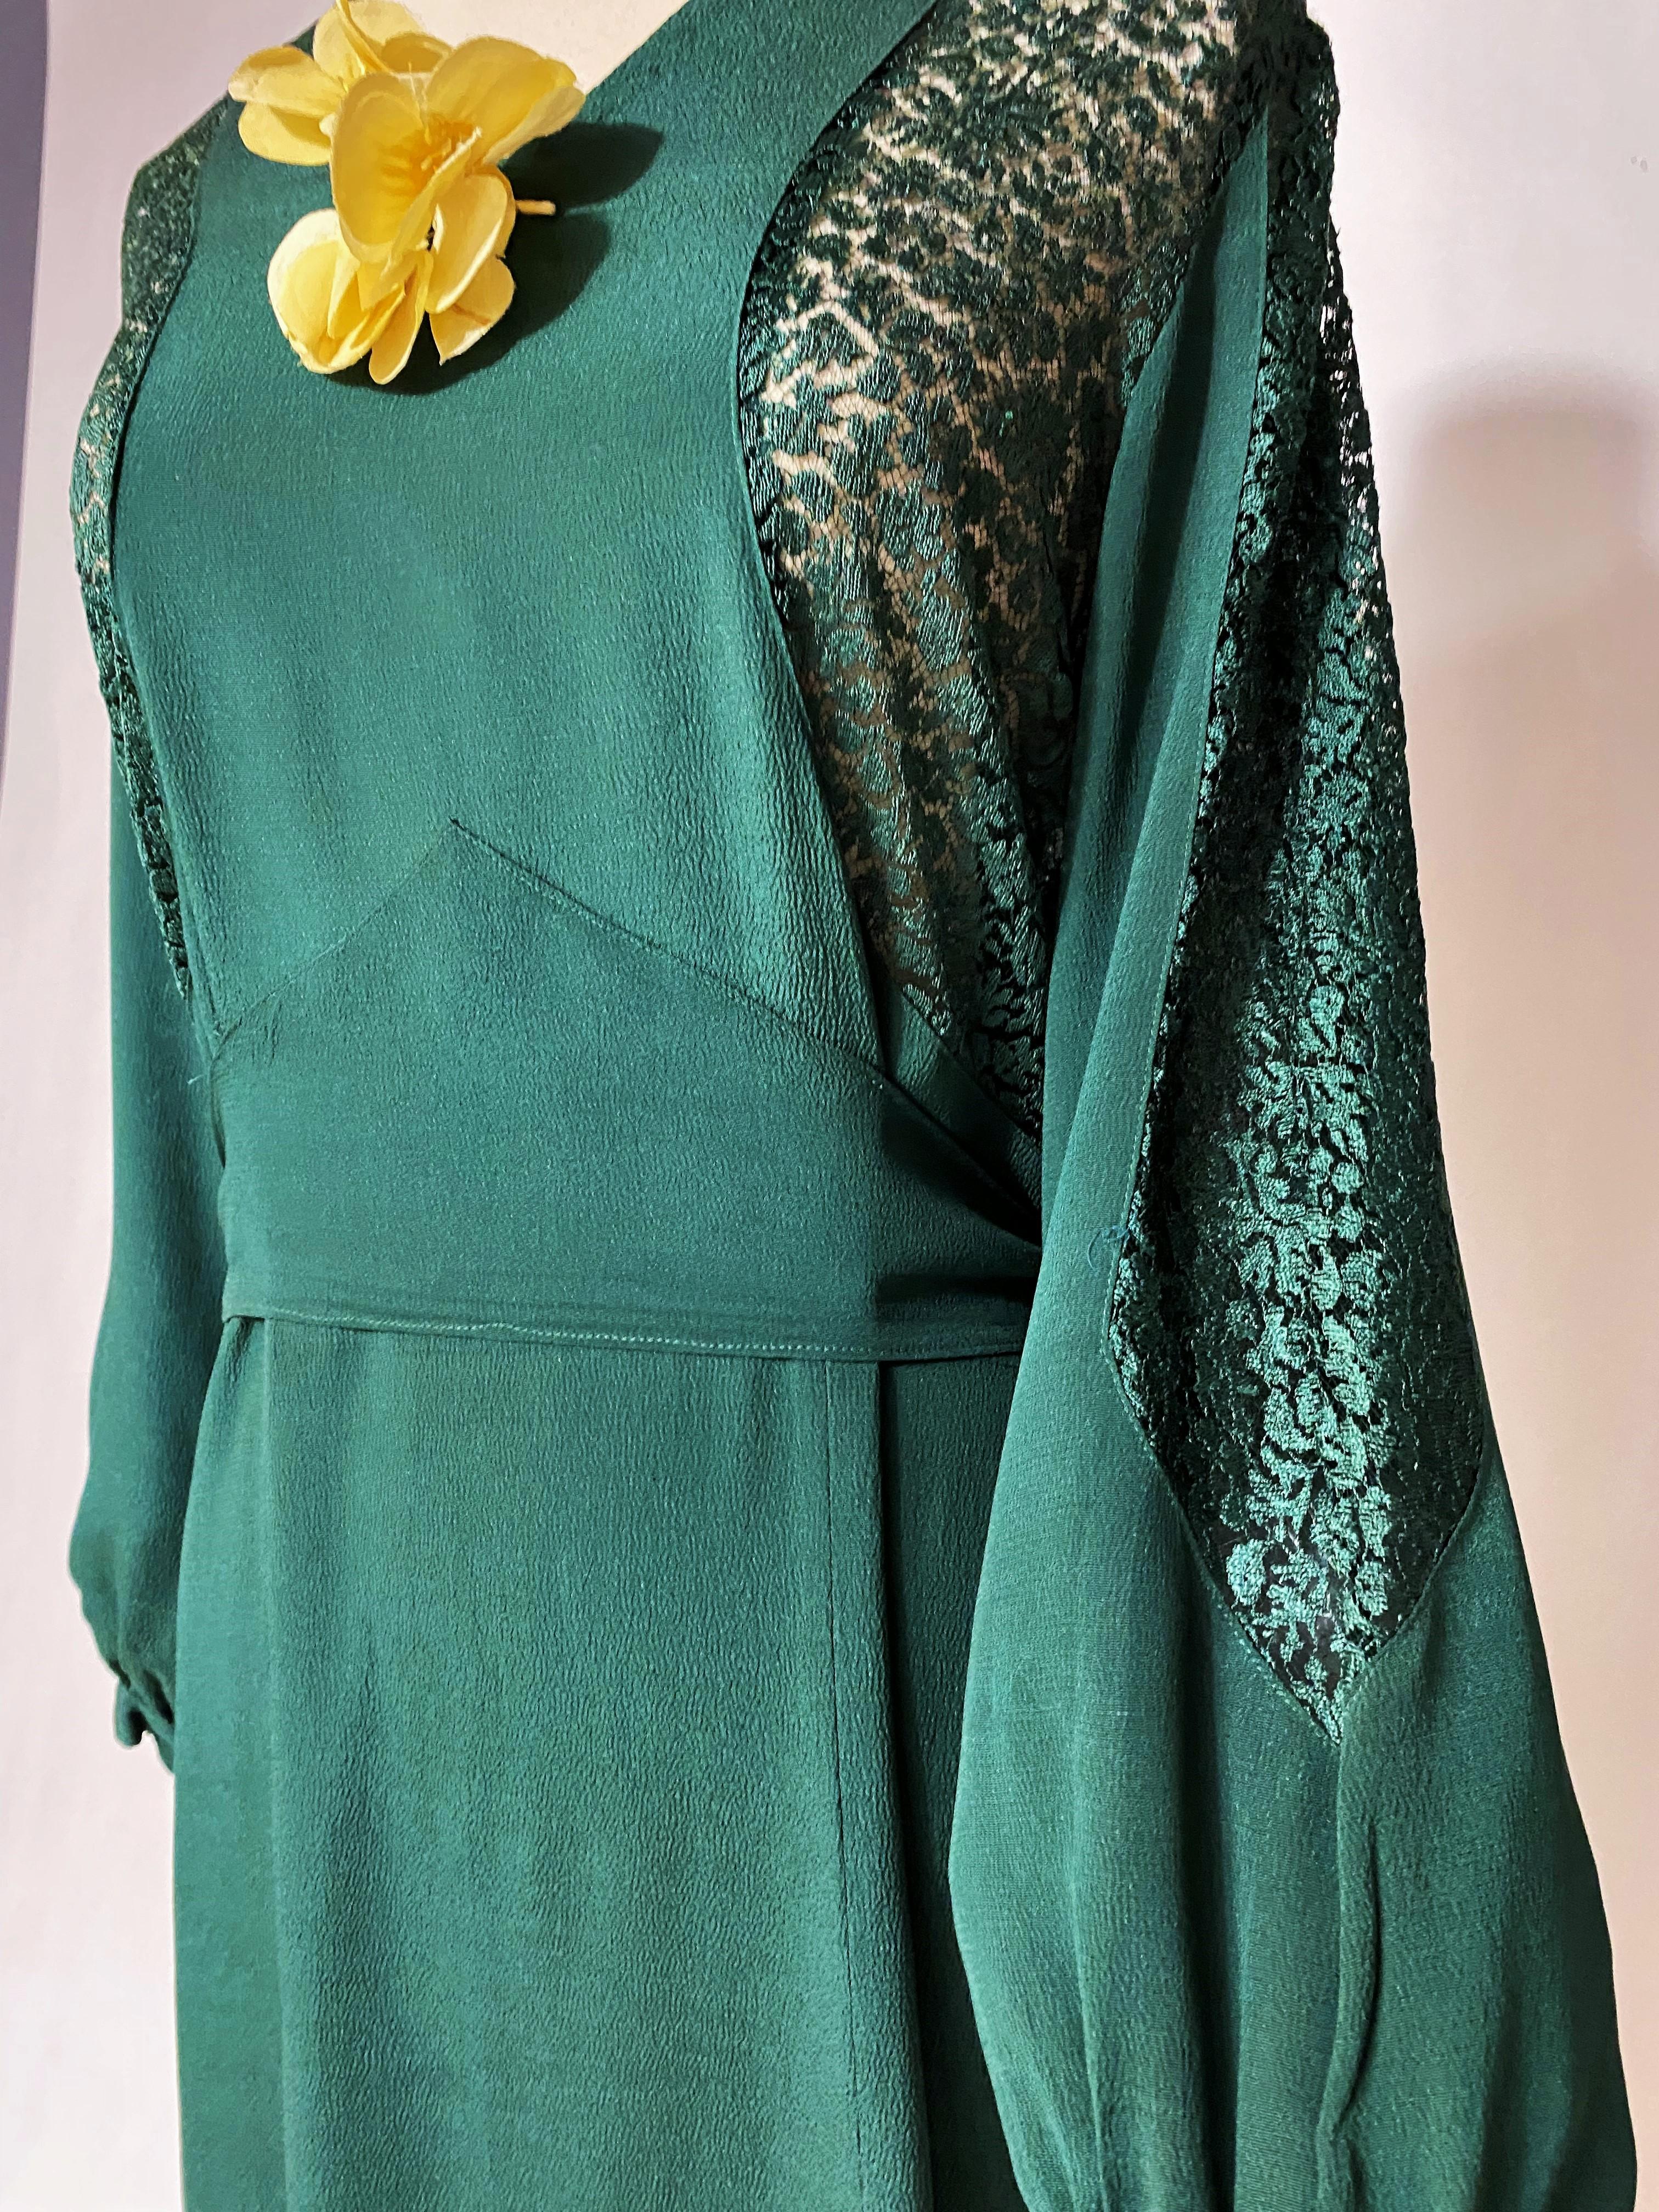 An Emerald green crepe and lace evening dress- France Circa 1940 For Sale 4